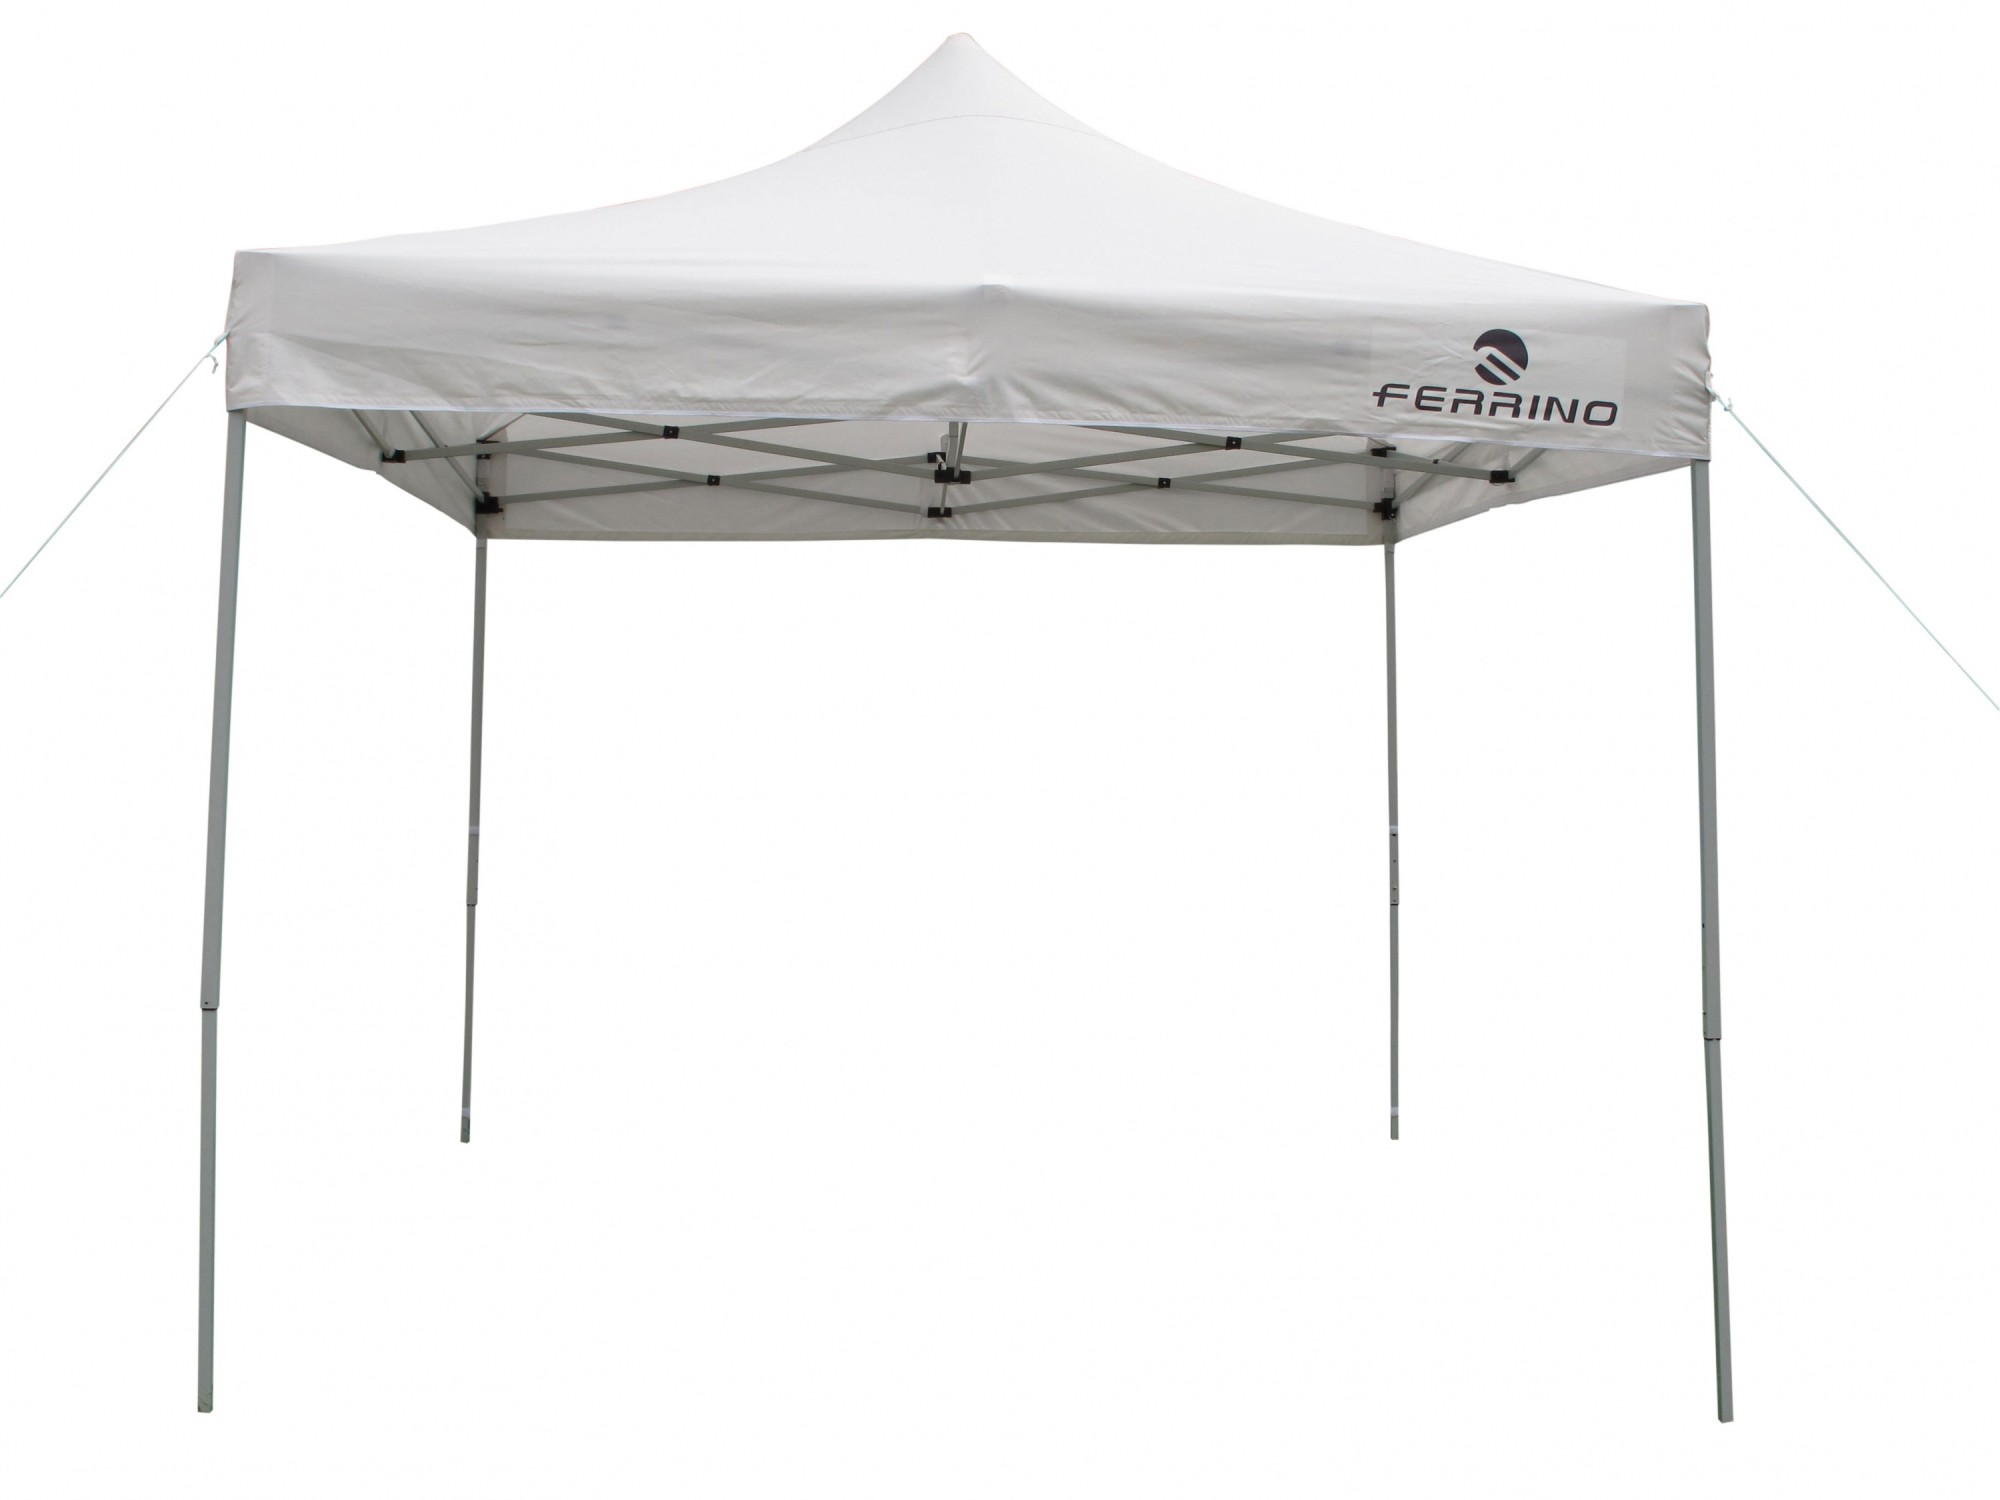 New gazebo having simpler and more essential features compared with Ultra  Rapid Modular Tent. This allows to reduce costs while keeping the same  dimen - Ferrino